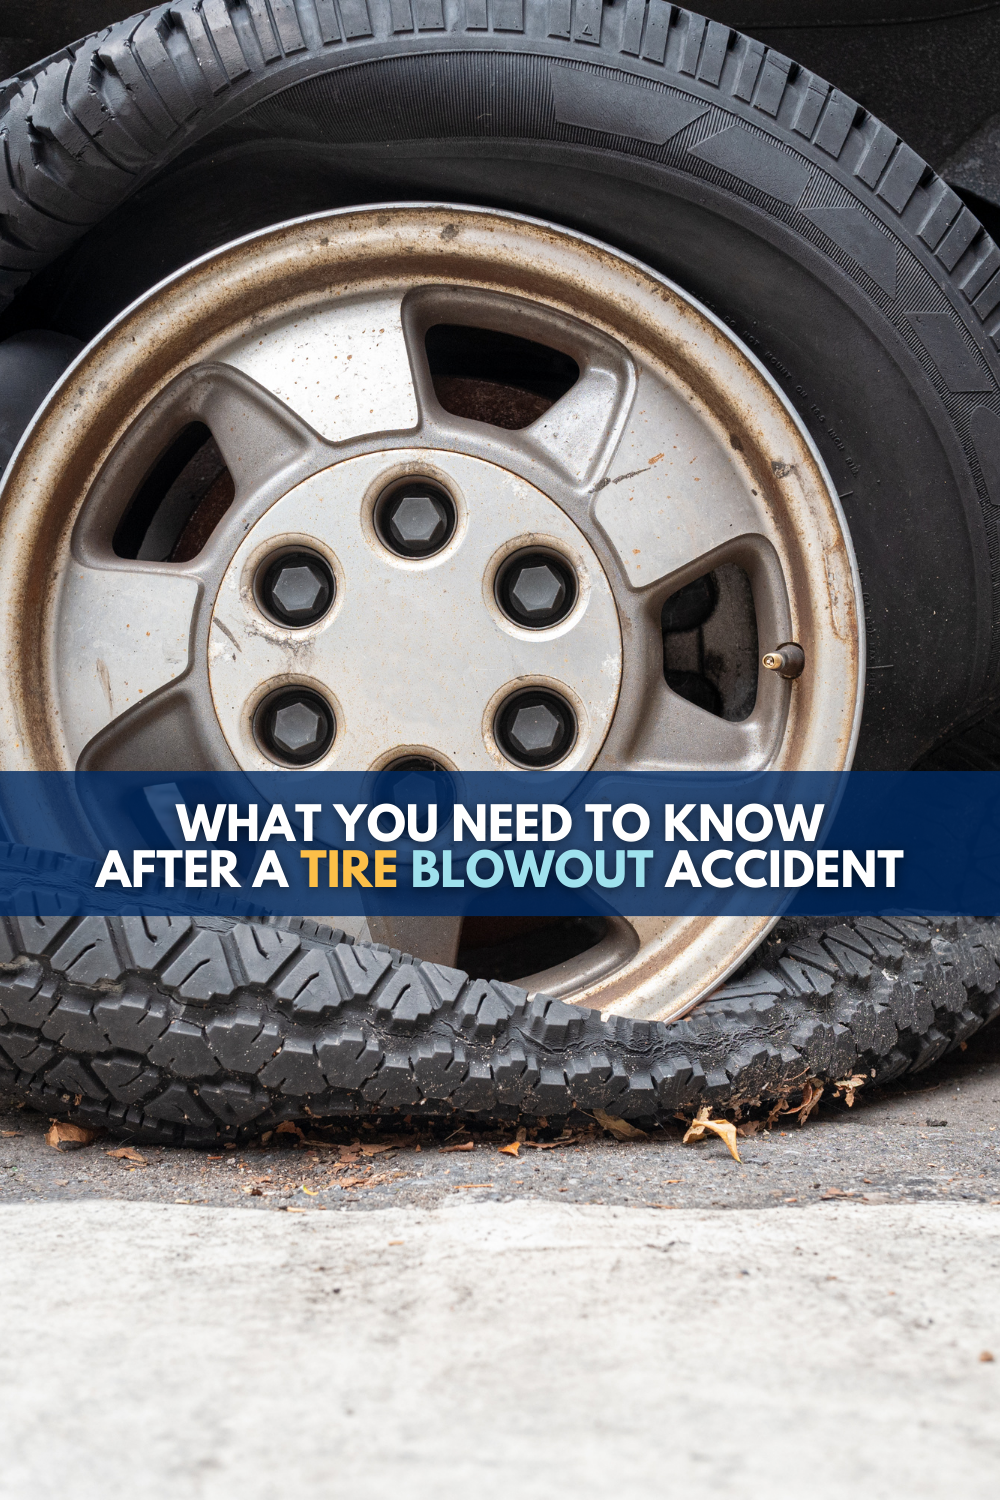 Michigan Tire Blowout Accident: What You Need To Know